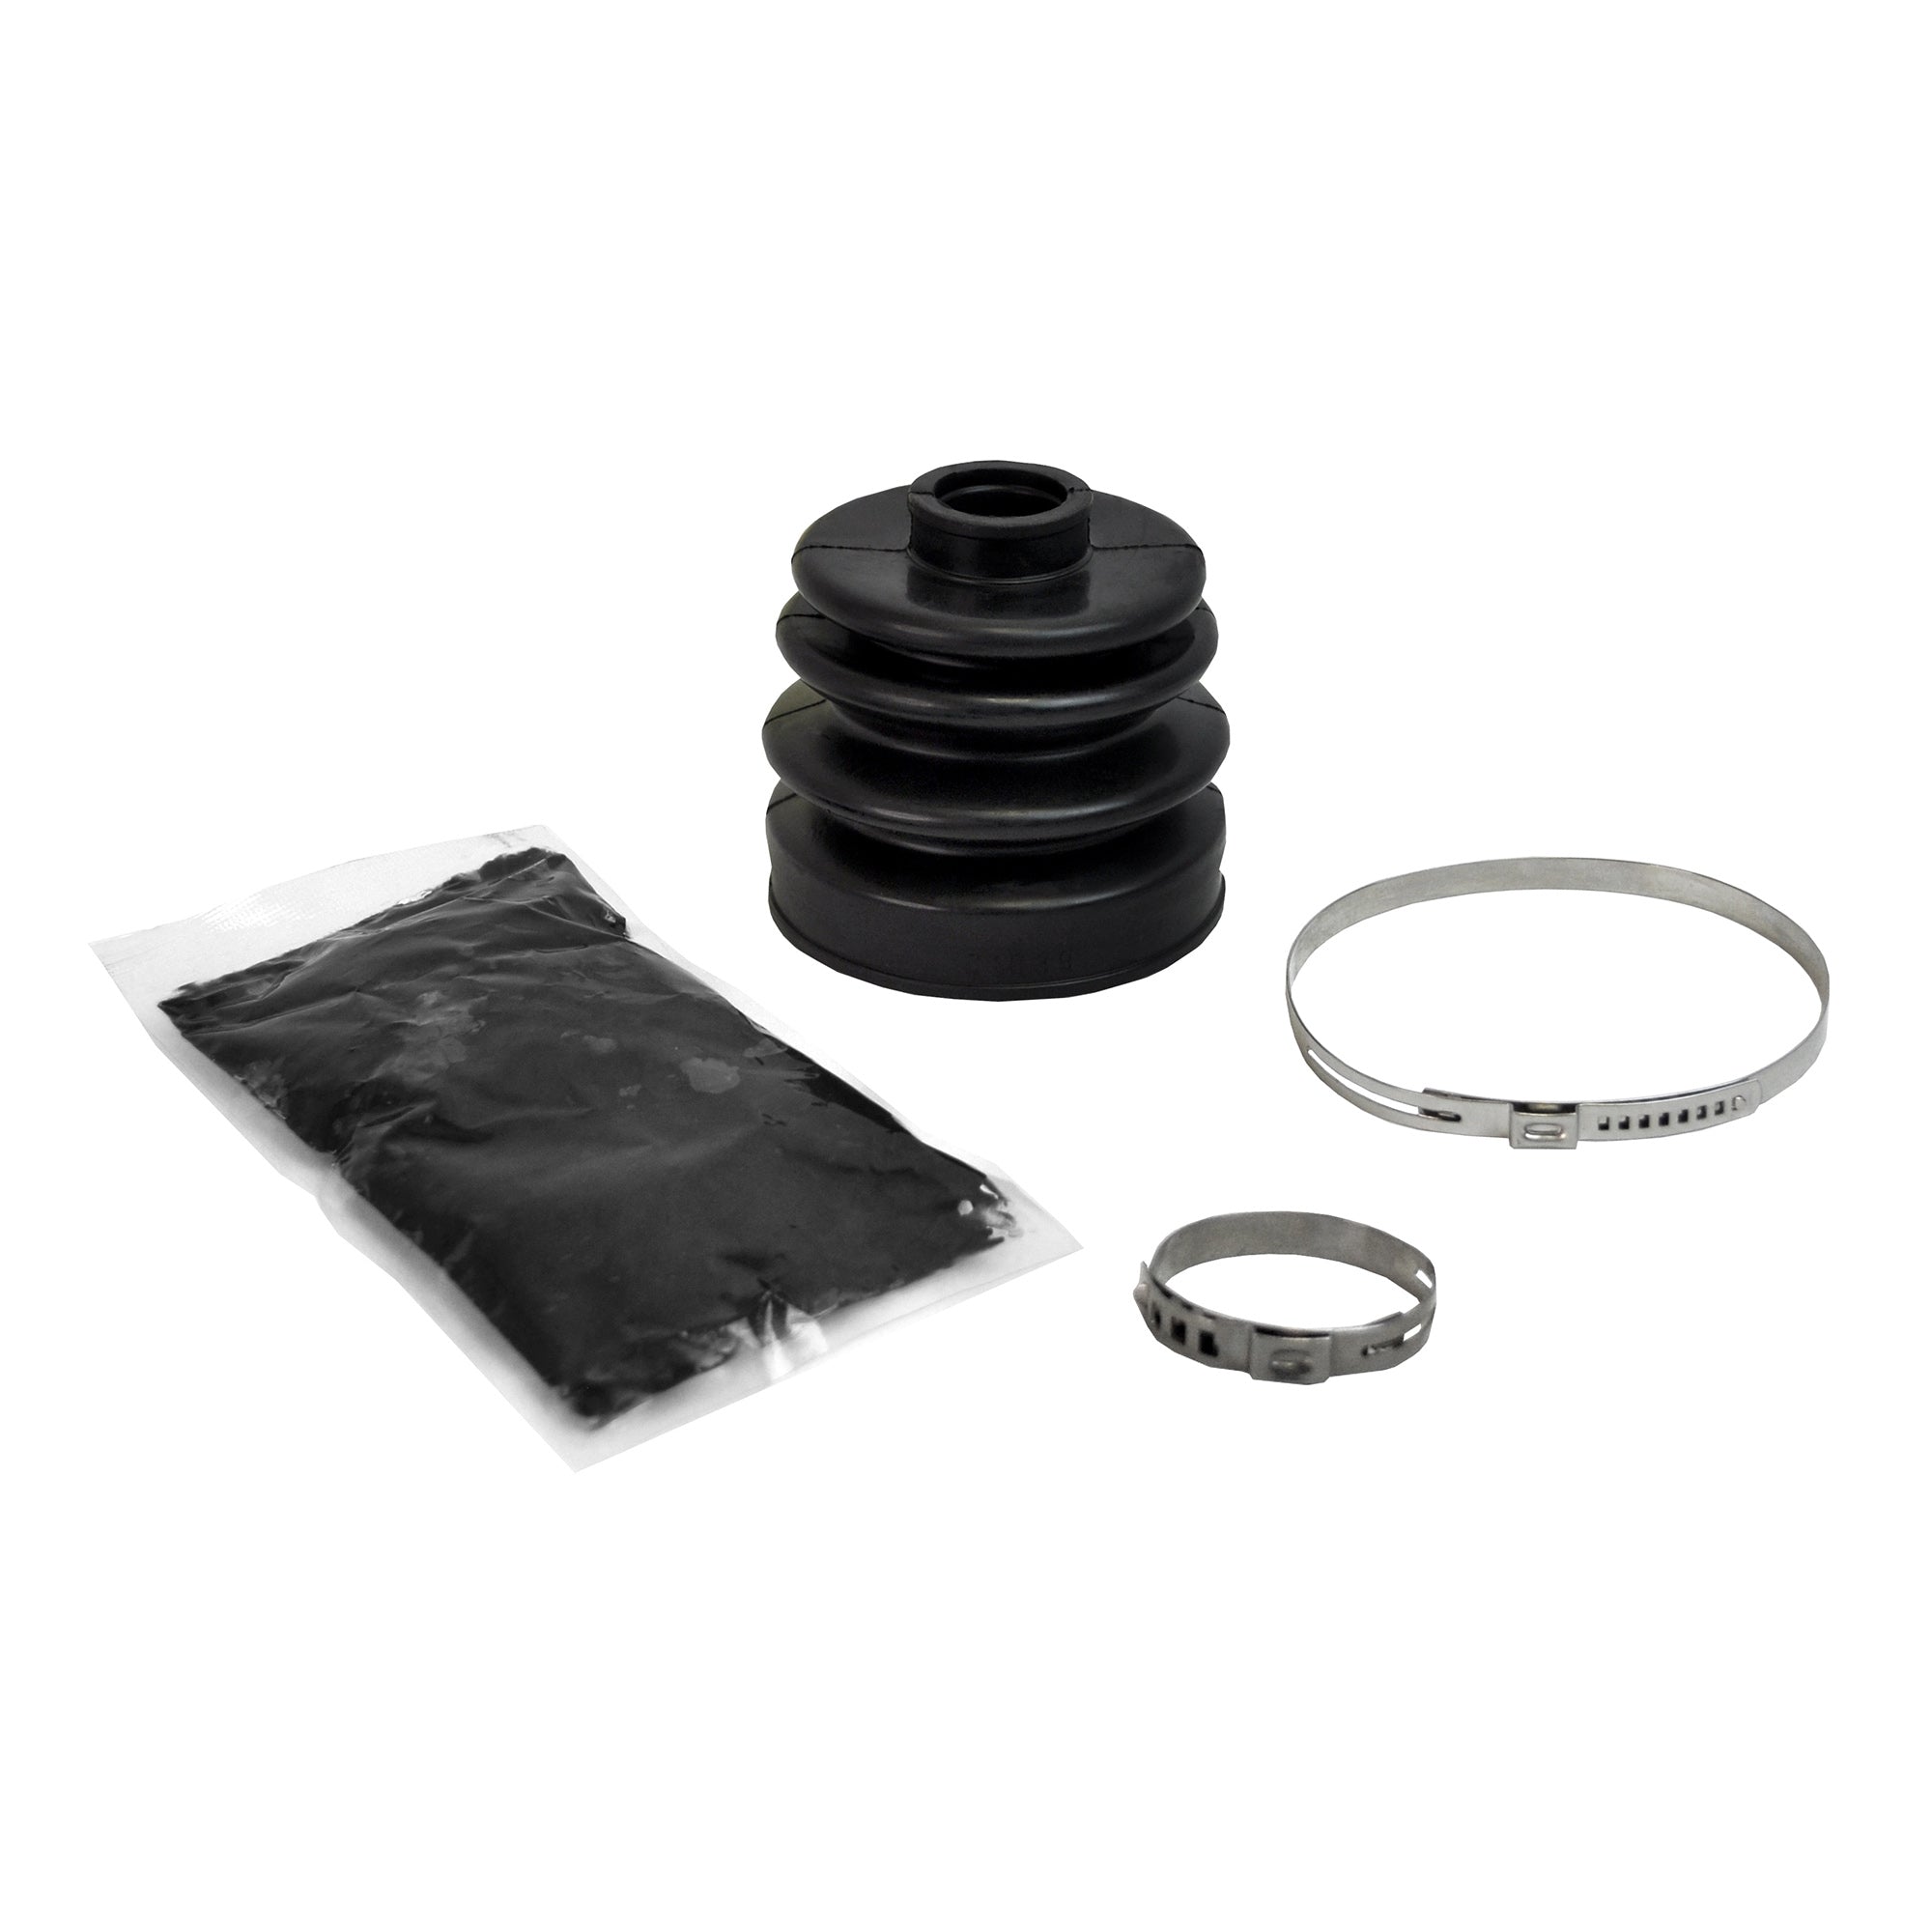 Polaris ACE 500 Rugged OE Replacement Boot Kit